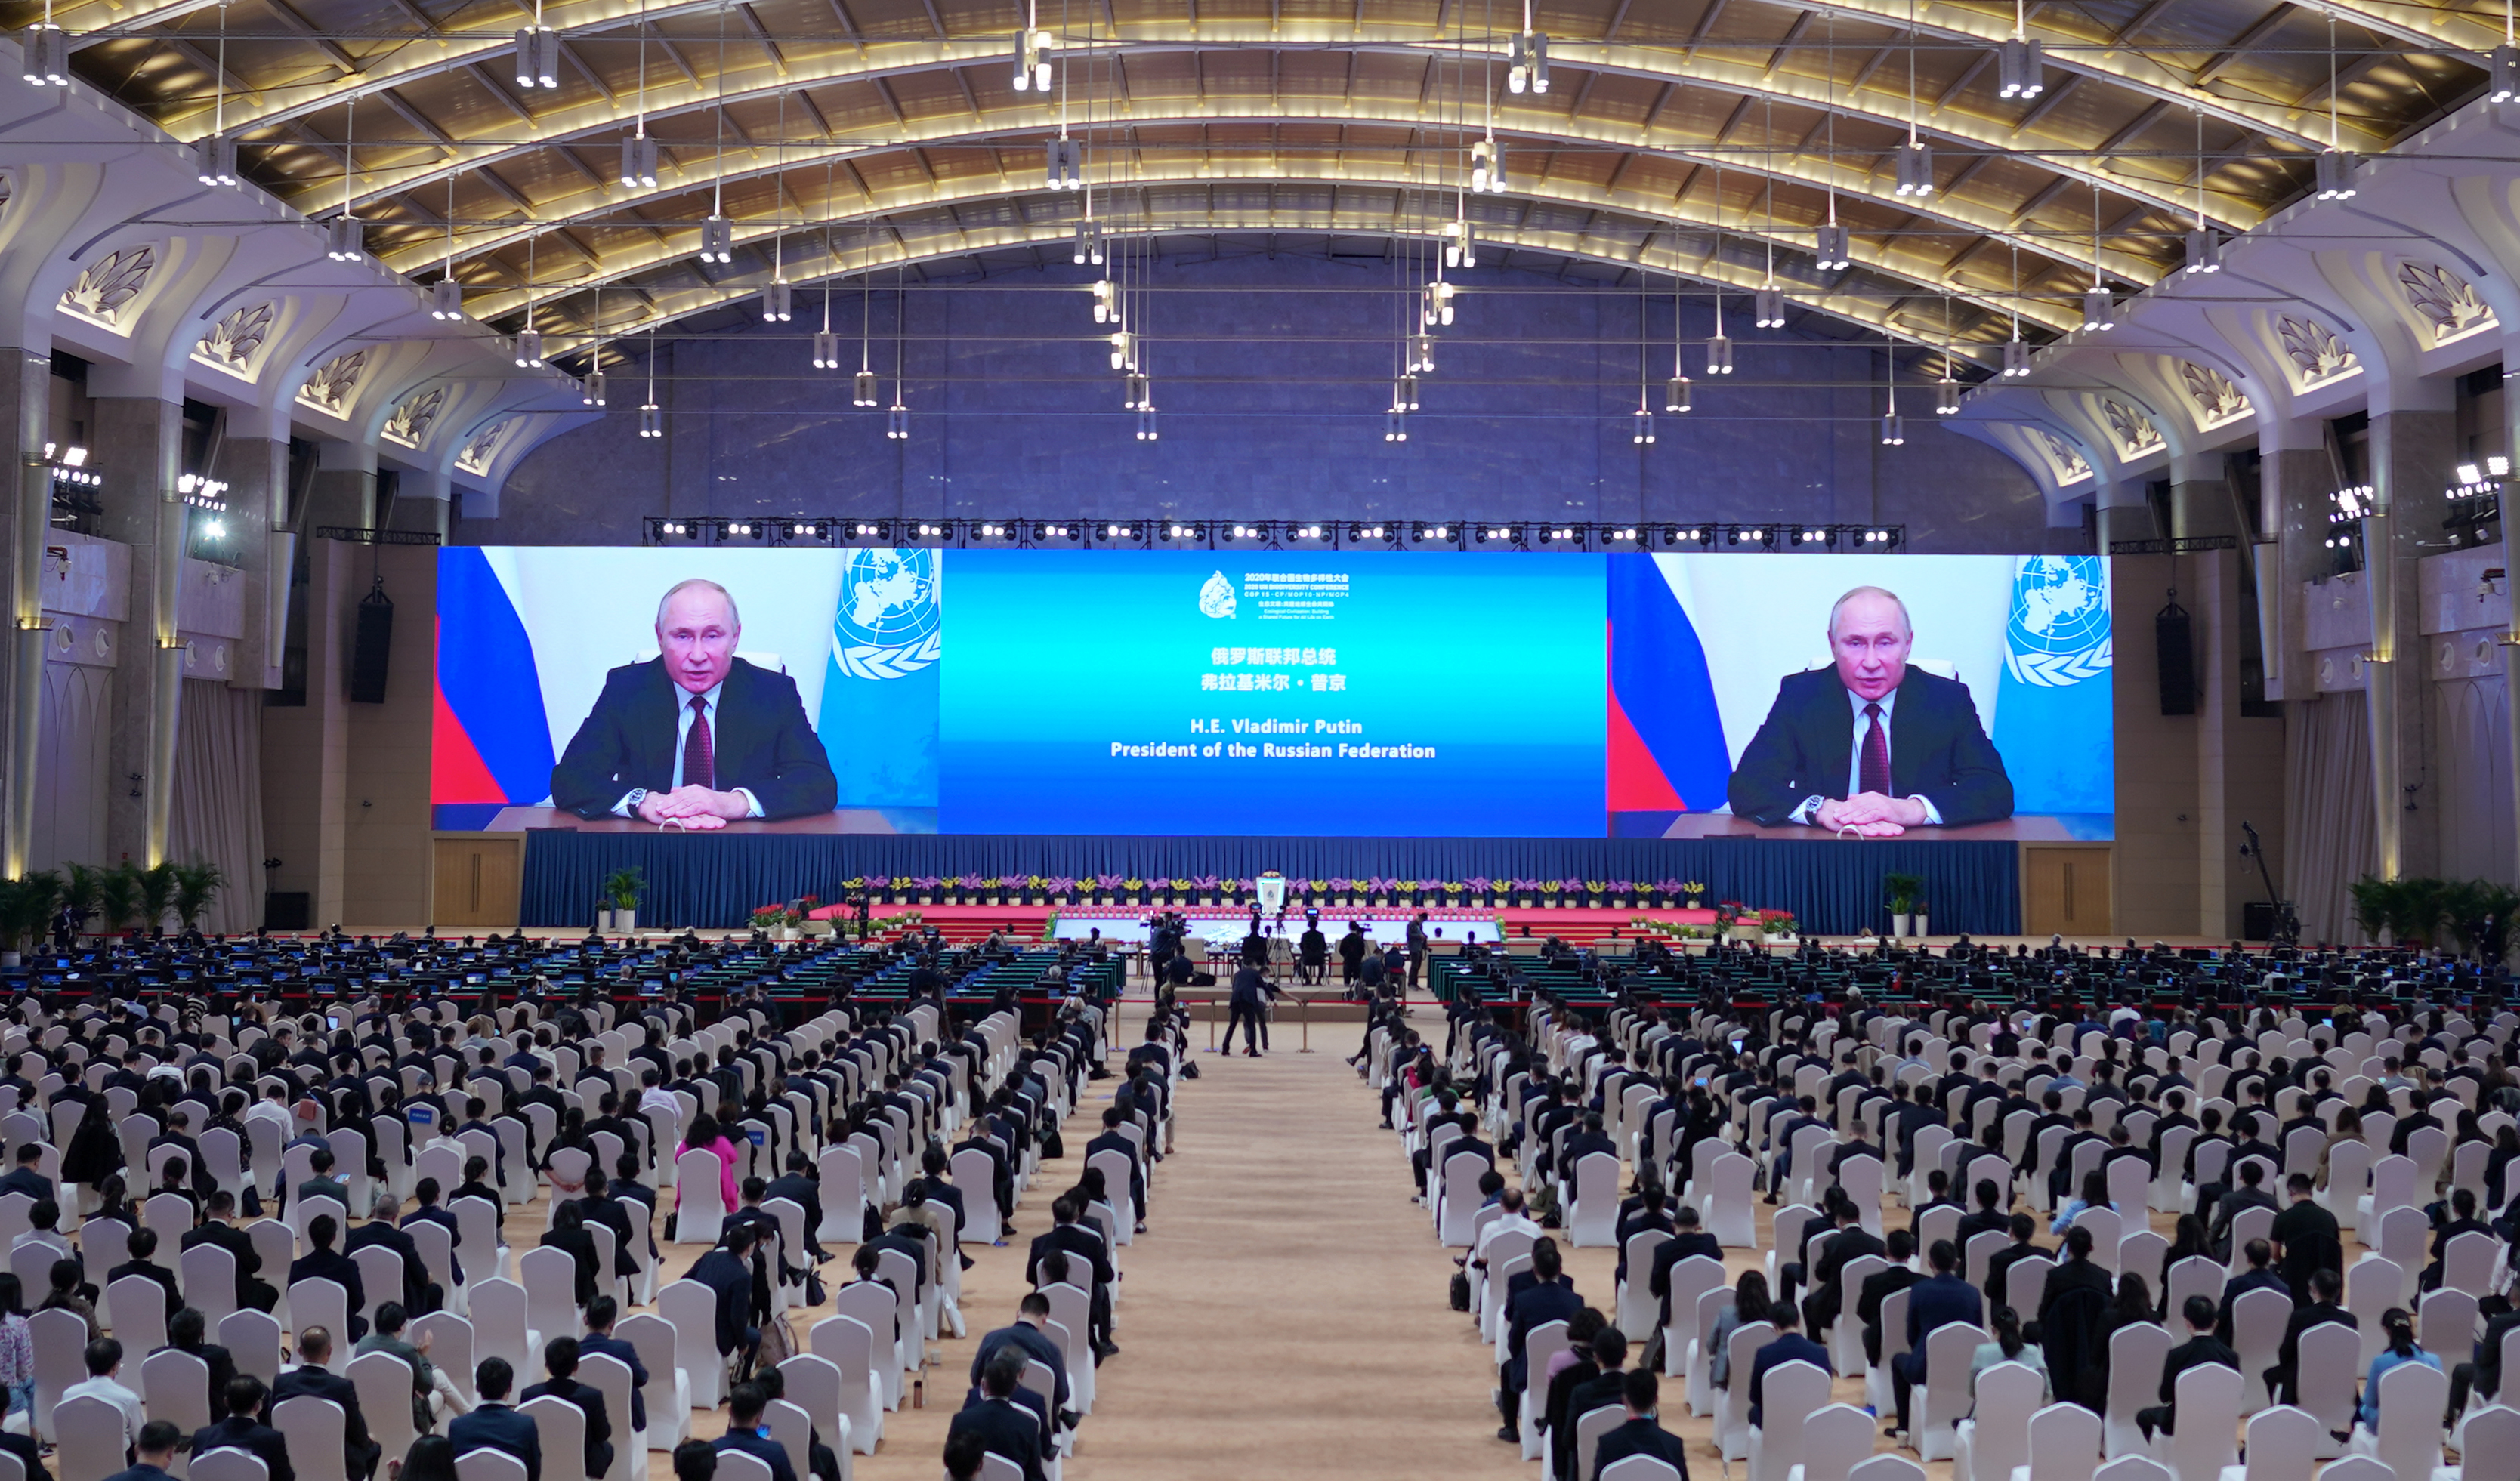 Russian President Vladimir Putin speaks via video at the leaders' summit of the 15th meeting of the Conference of the Parties to the Convention on Biological Diversity (COP15) in Kunming, southwest China's Yunnan Province, Oct. 12, 2021.